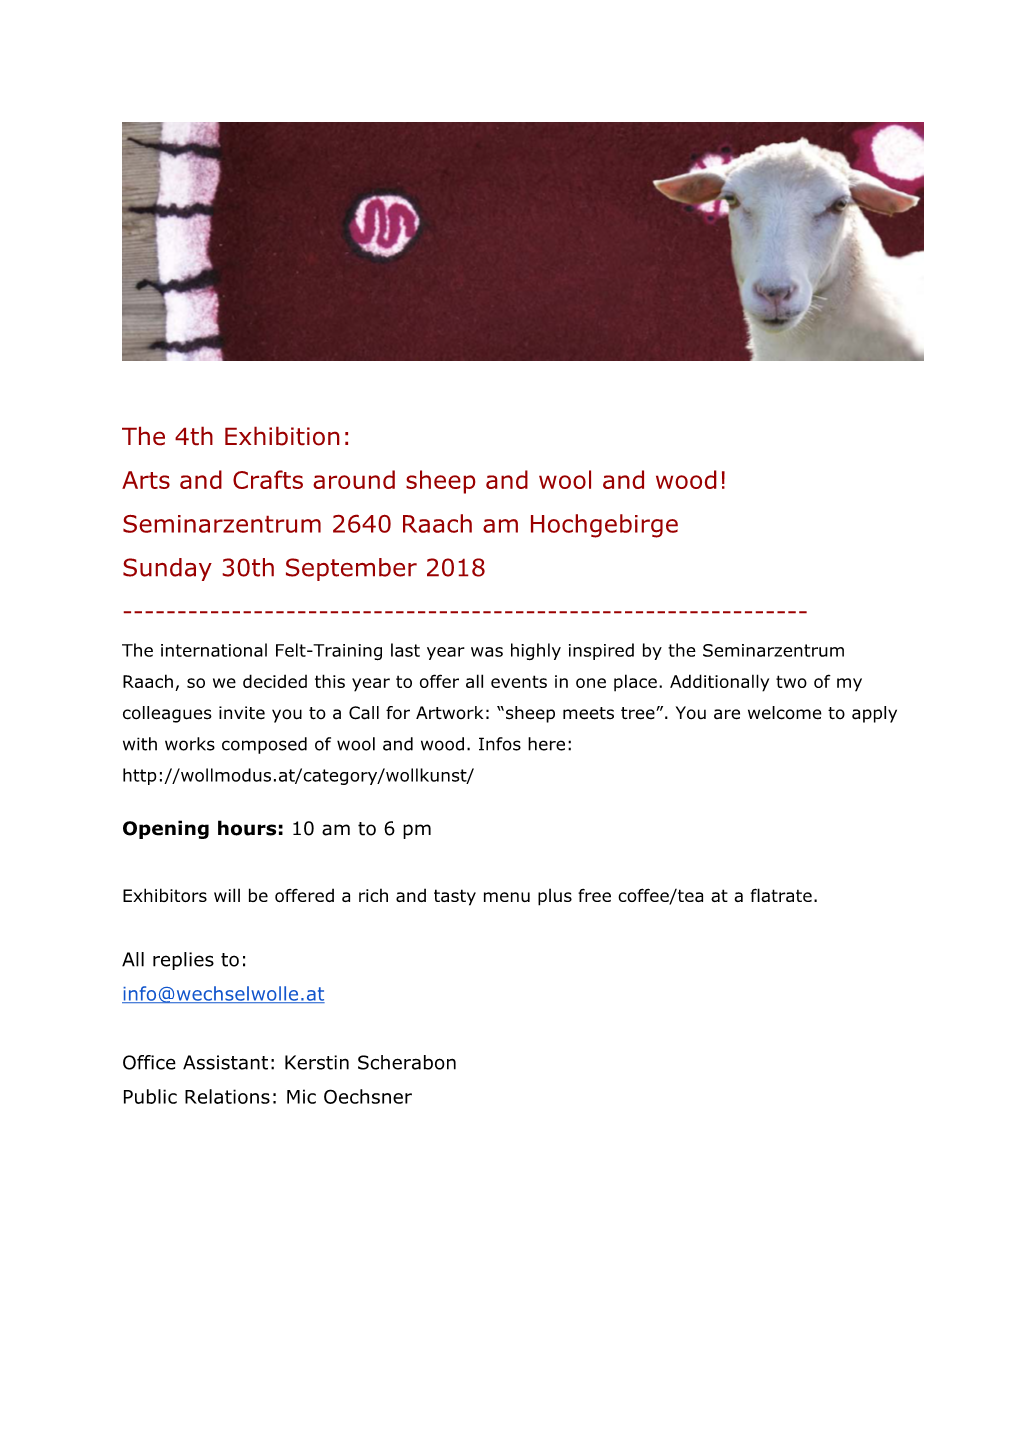 The 4Th Exhibition: Arts and Crafts Around Sheep and Wool and Wood!